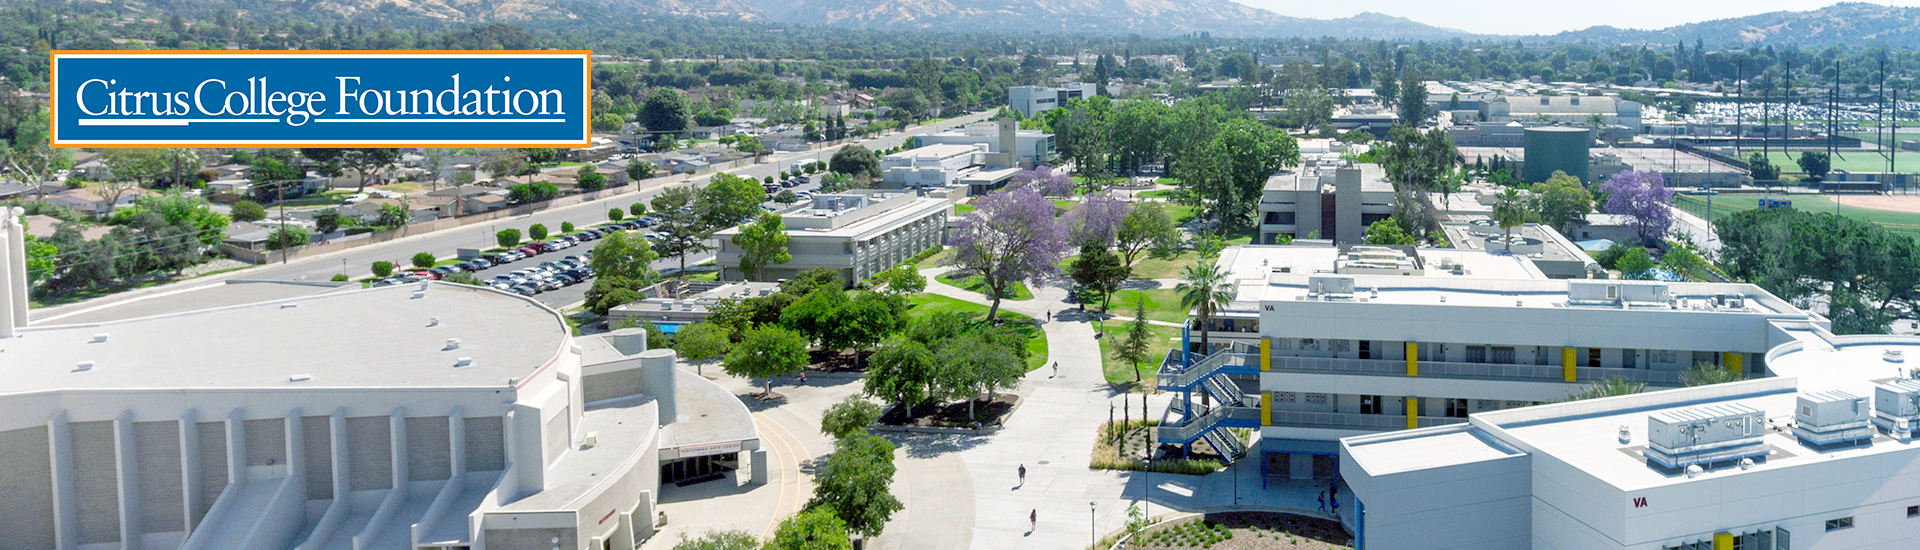 aerial shot of the Citrus College campus facing east with the Citrus College Foundation logo